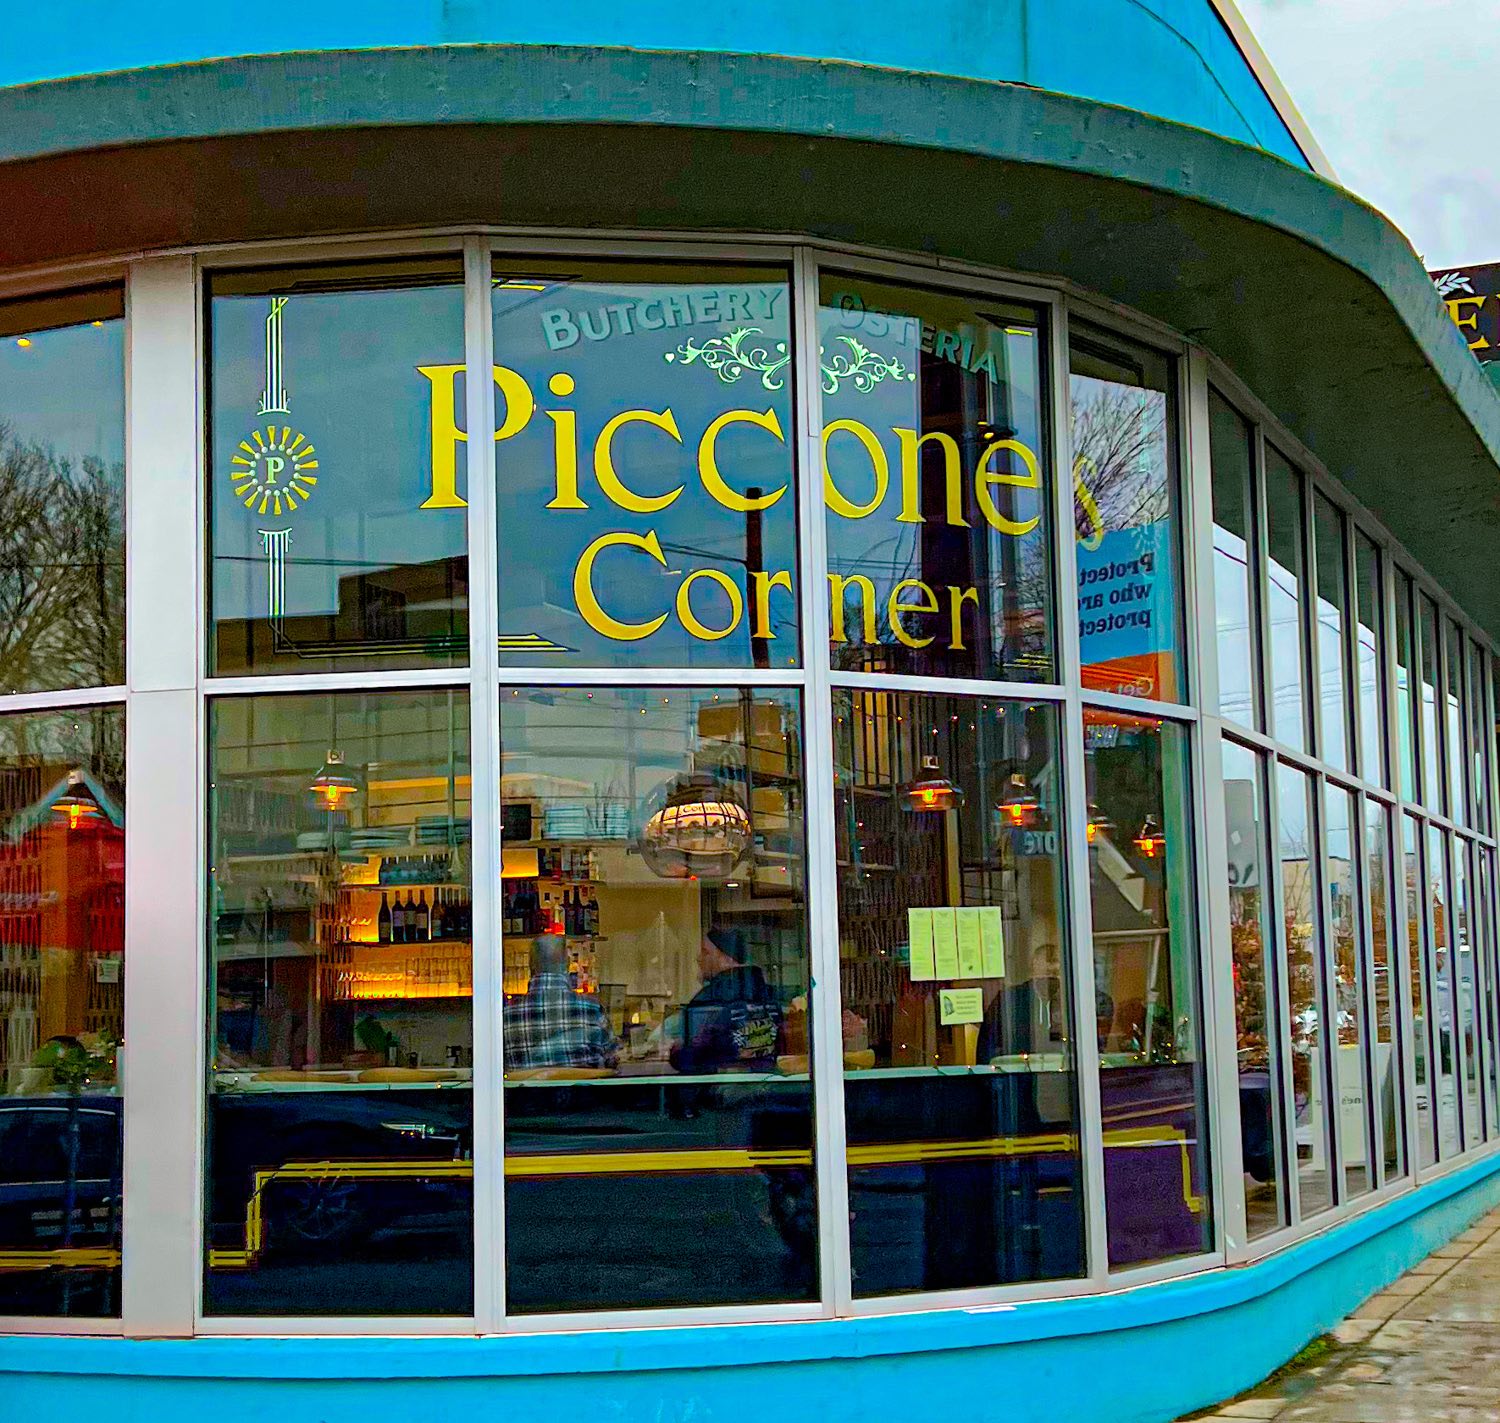  A Magnificent Meal at Piccone’s Corner Portland, Oregon Photos by Steven Shomler Culinary Treasure Network 